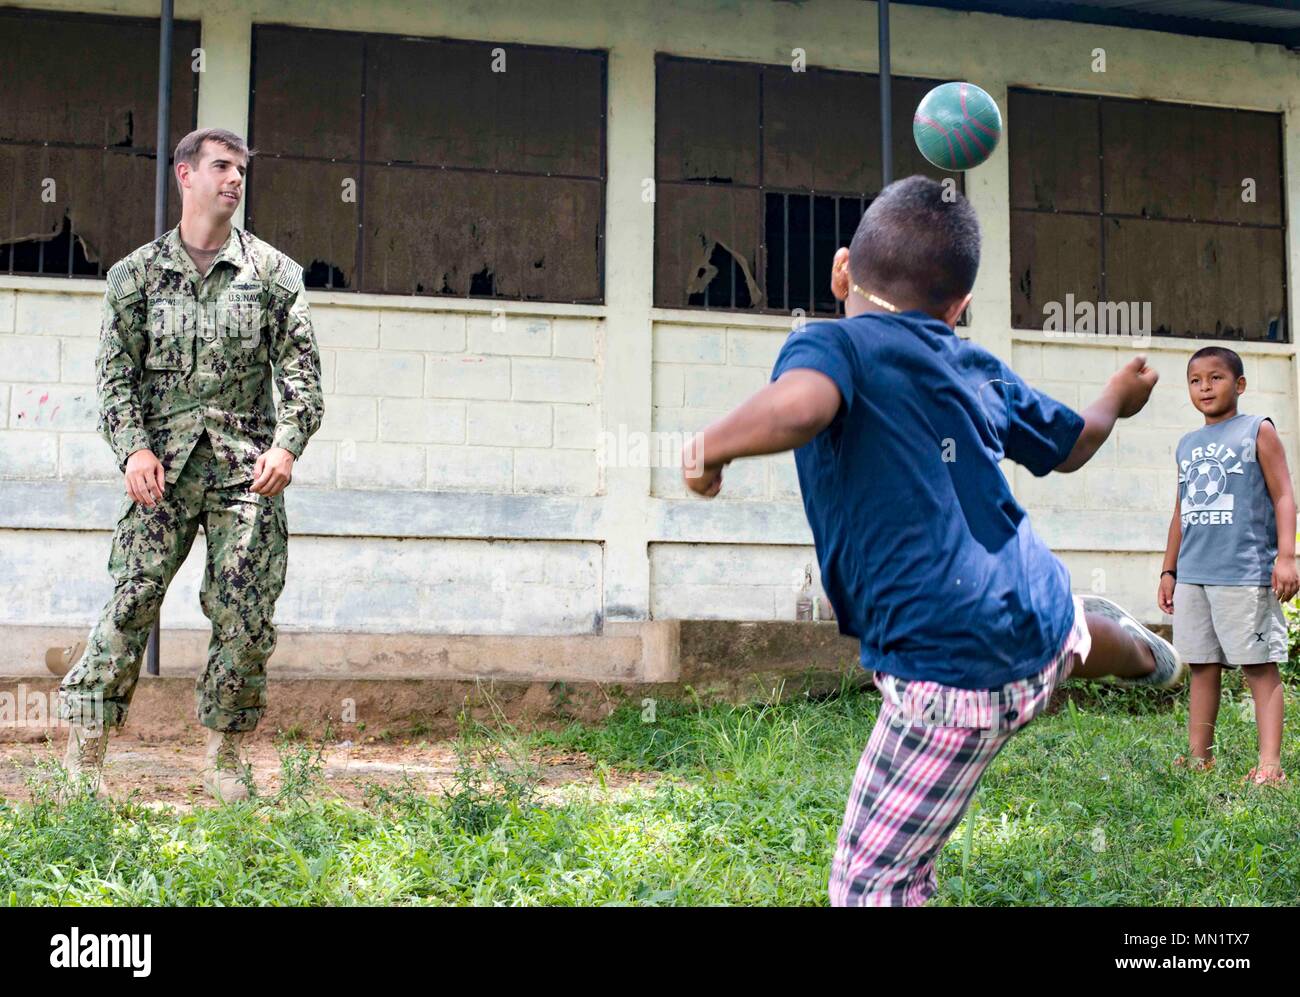 170810-N-KW679-0144 Tarros, Honduras (August 10, 2017) Lt. j.g. Jack Dembowski, assistant operations officer for Southern Partnership Station 17, plays soccer with Honduran students, during a community relations project (COMREL) at Escuela Rural Mixta Luz y Esperanza, a local elementary school. SPS 17 is a U.S. Navy deployment, executed by U.S. Naval Forces Southern Command/U.S. 4th Fleet, focused on subject matter expert exchanges with partner nation militaries and security forces in Central and South America. (U.S. Navy photo by Mass Communication Specialist 3rd Class Kristen Cheyenne Yarber Stock Photo